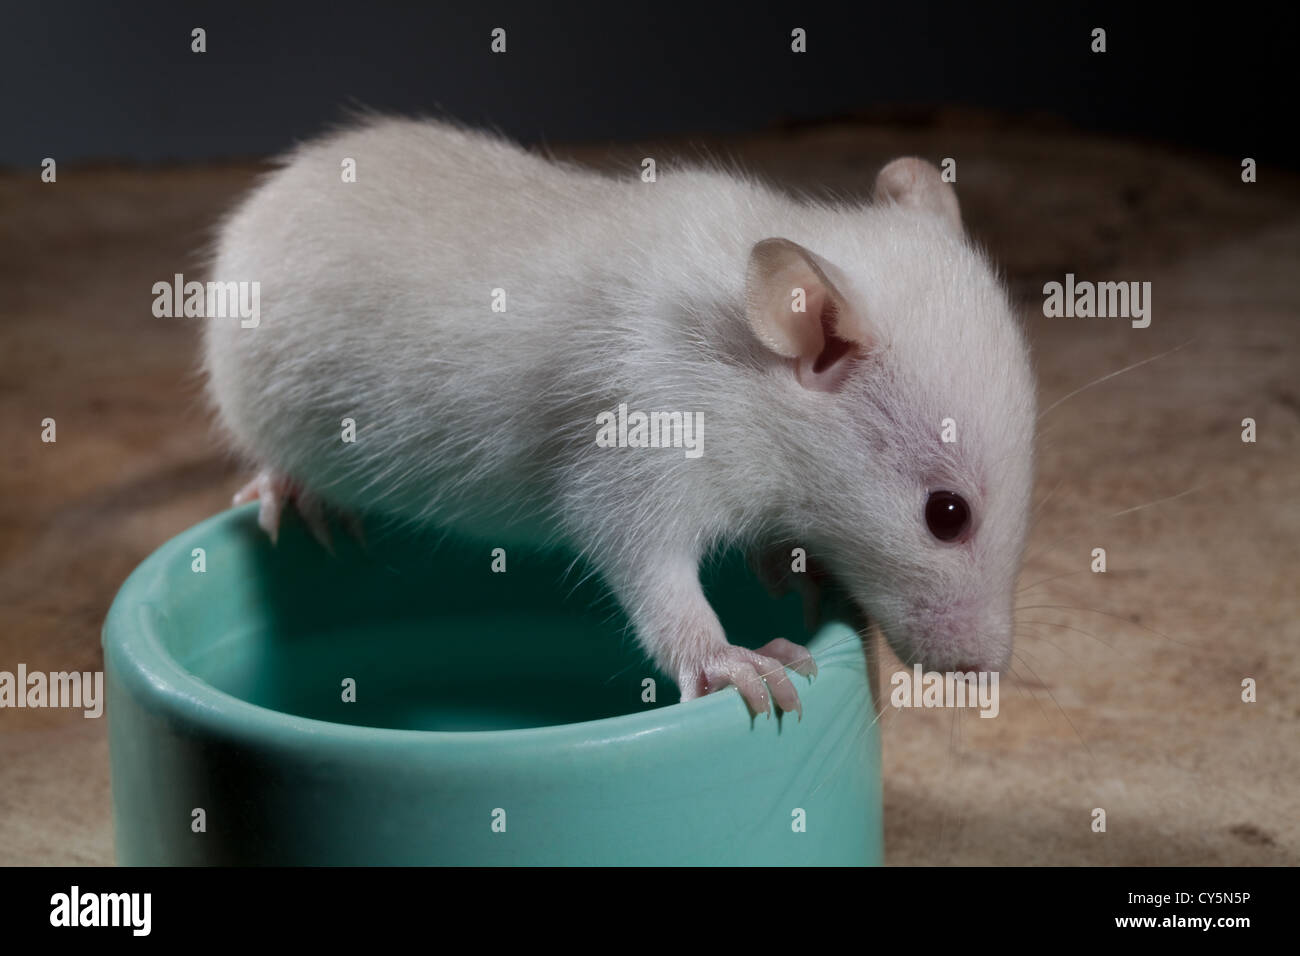 Young White or Albino Rat (Rattus norvegicus). Pet looking over a water bowl. Stock Photo